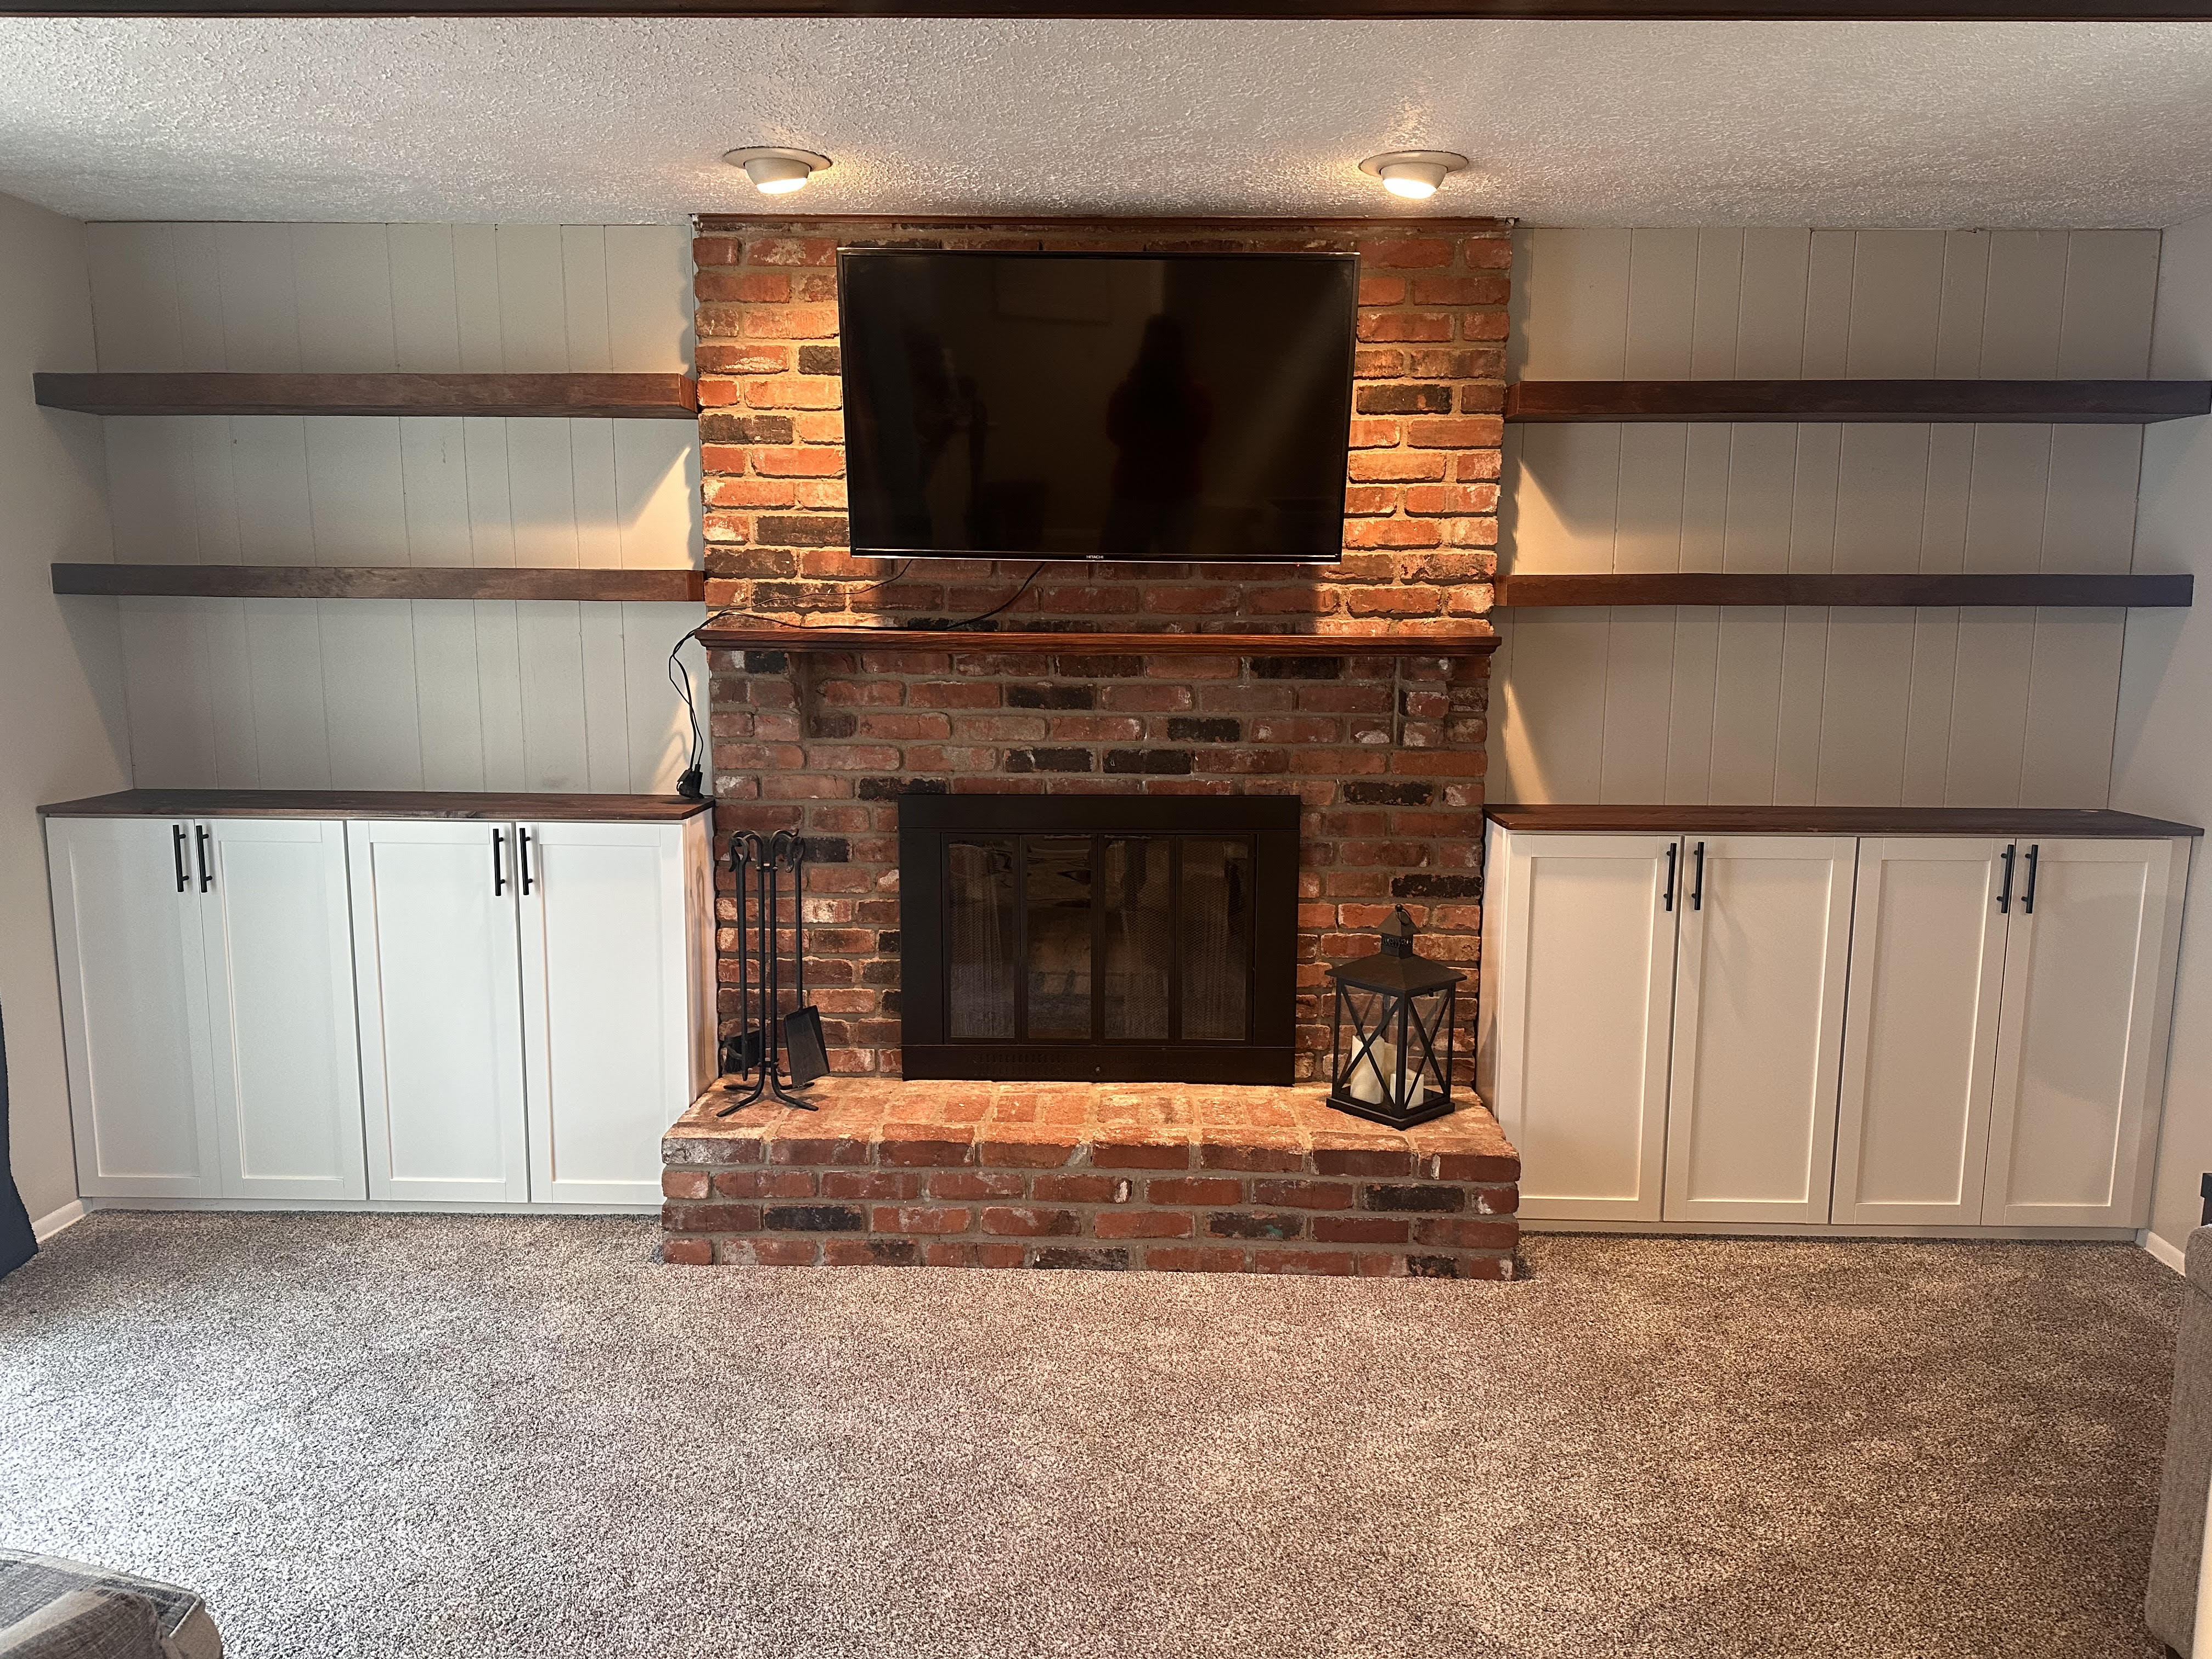 Remodeled home fireplace with shelves and cabinents.